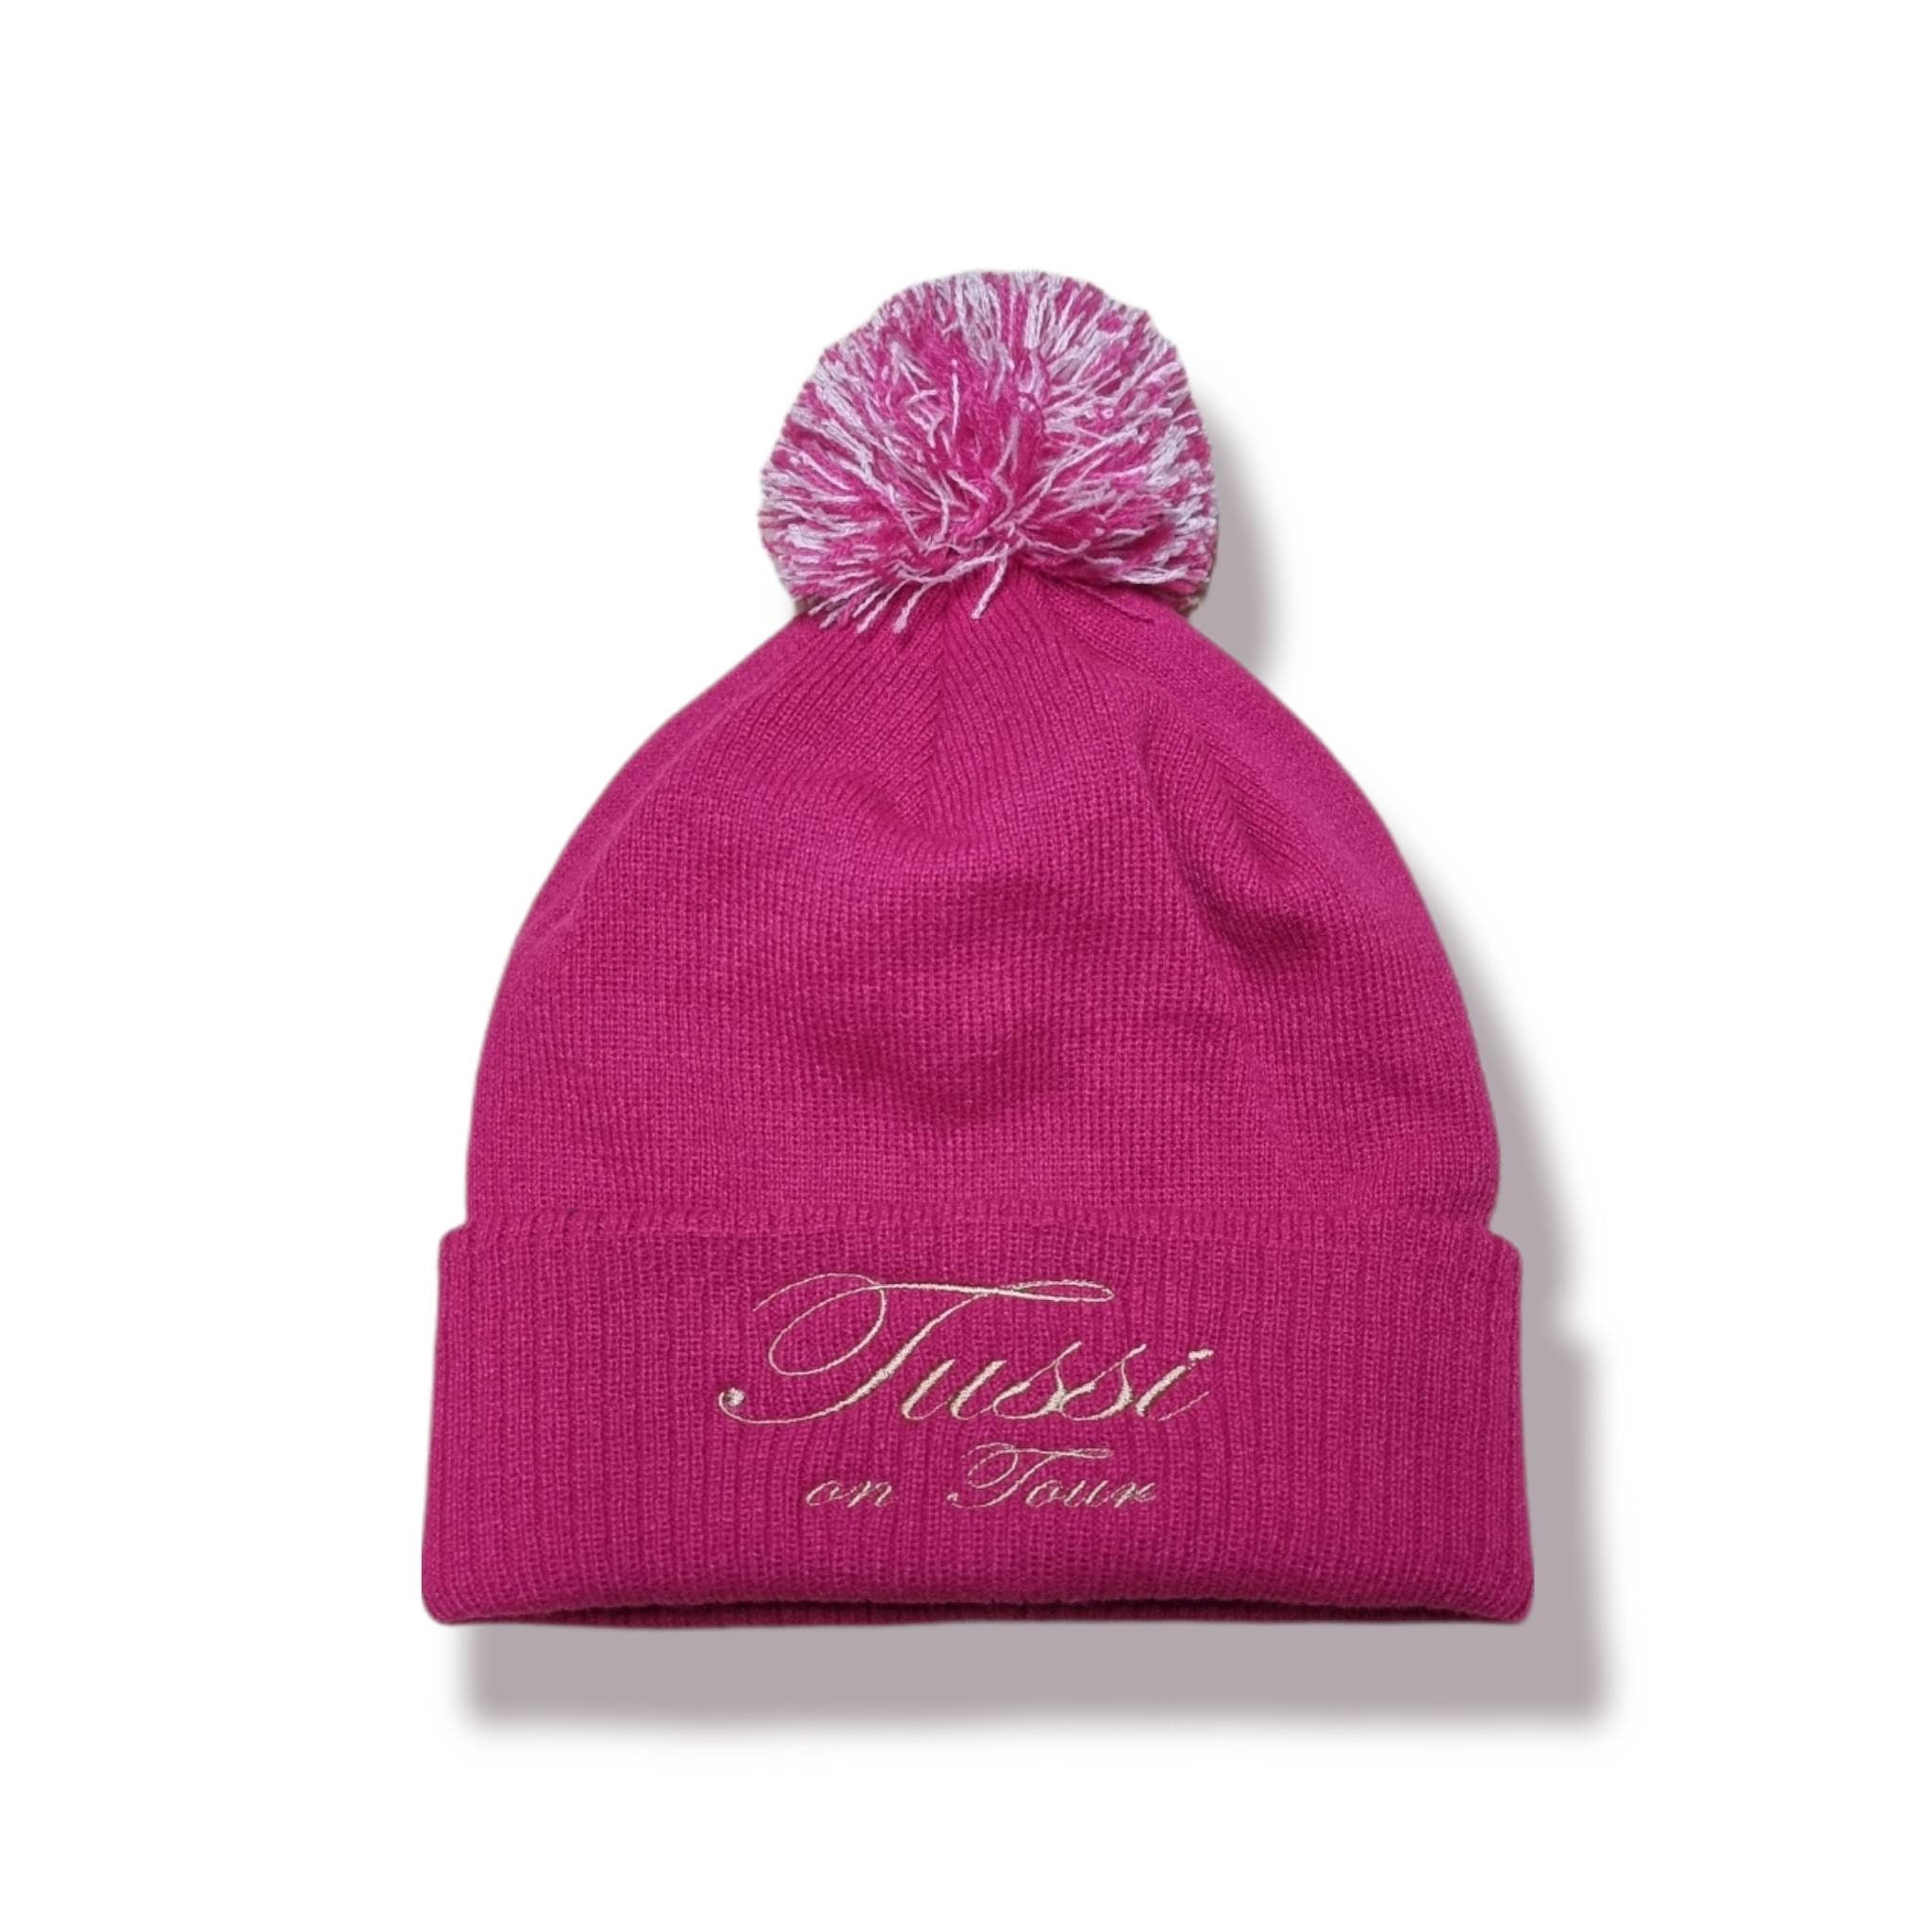 Embroidered Bobble Hat Tussi on Tour